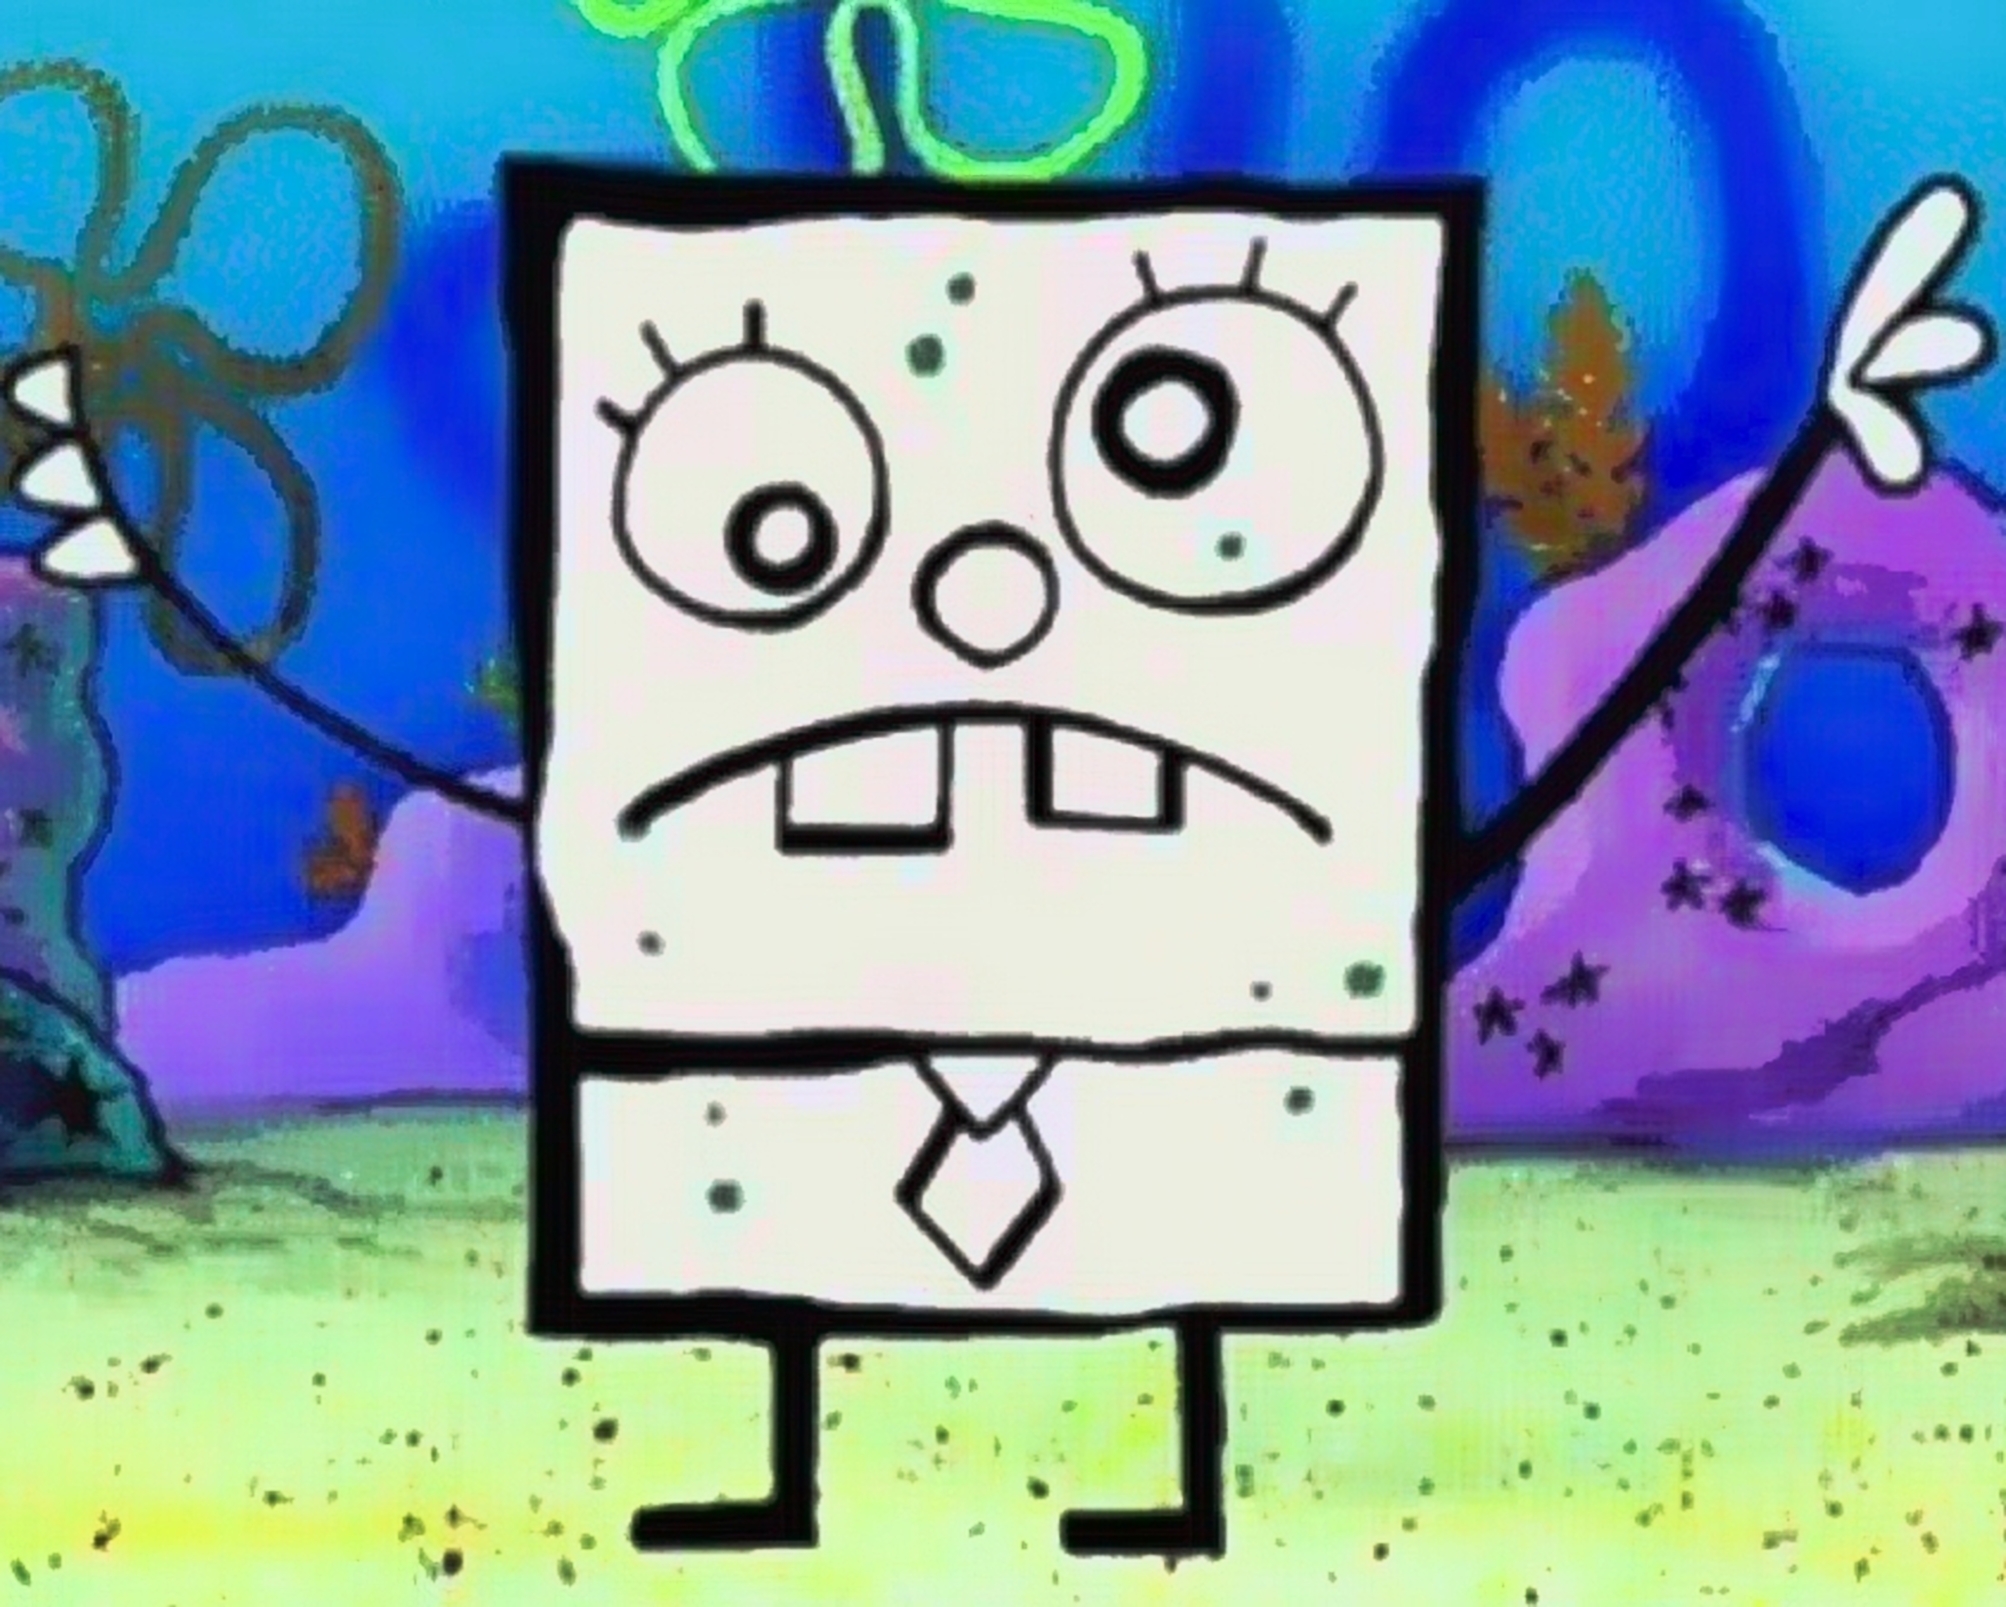 doodlebob and the magic pencil game